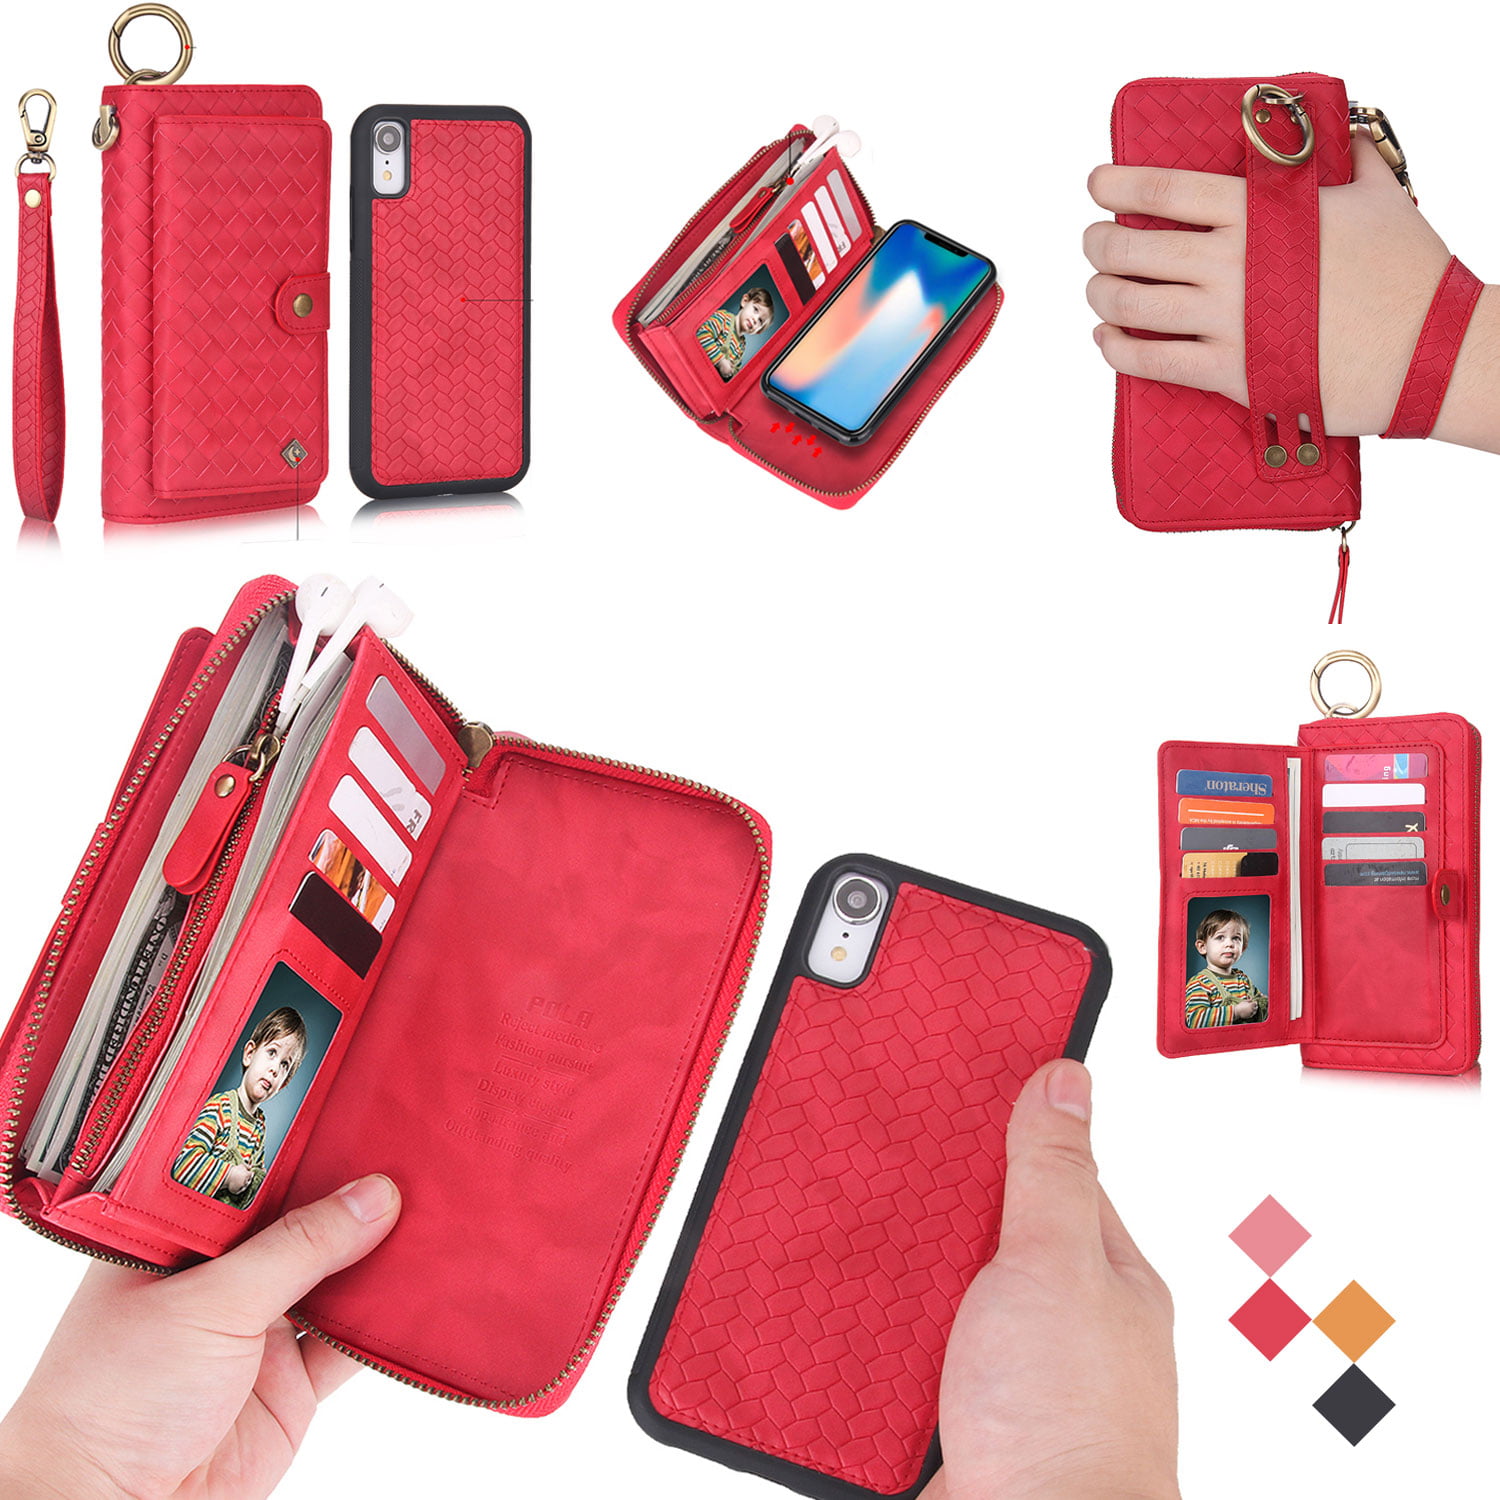 6.1 inch Glossy Leather Wallet Flip Cover with Magnetic Closure Compatible with Apple iPhone XR ELESNOW Case for iPhone XR Rose Red